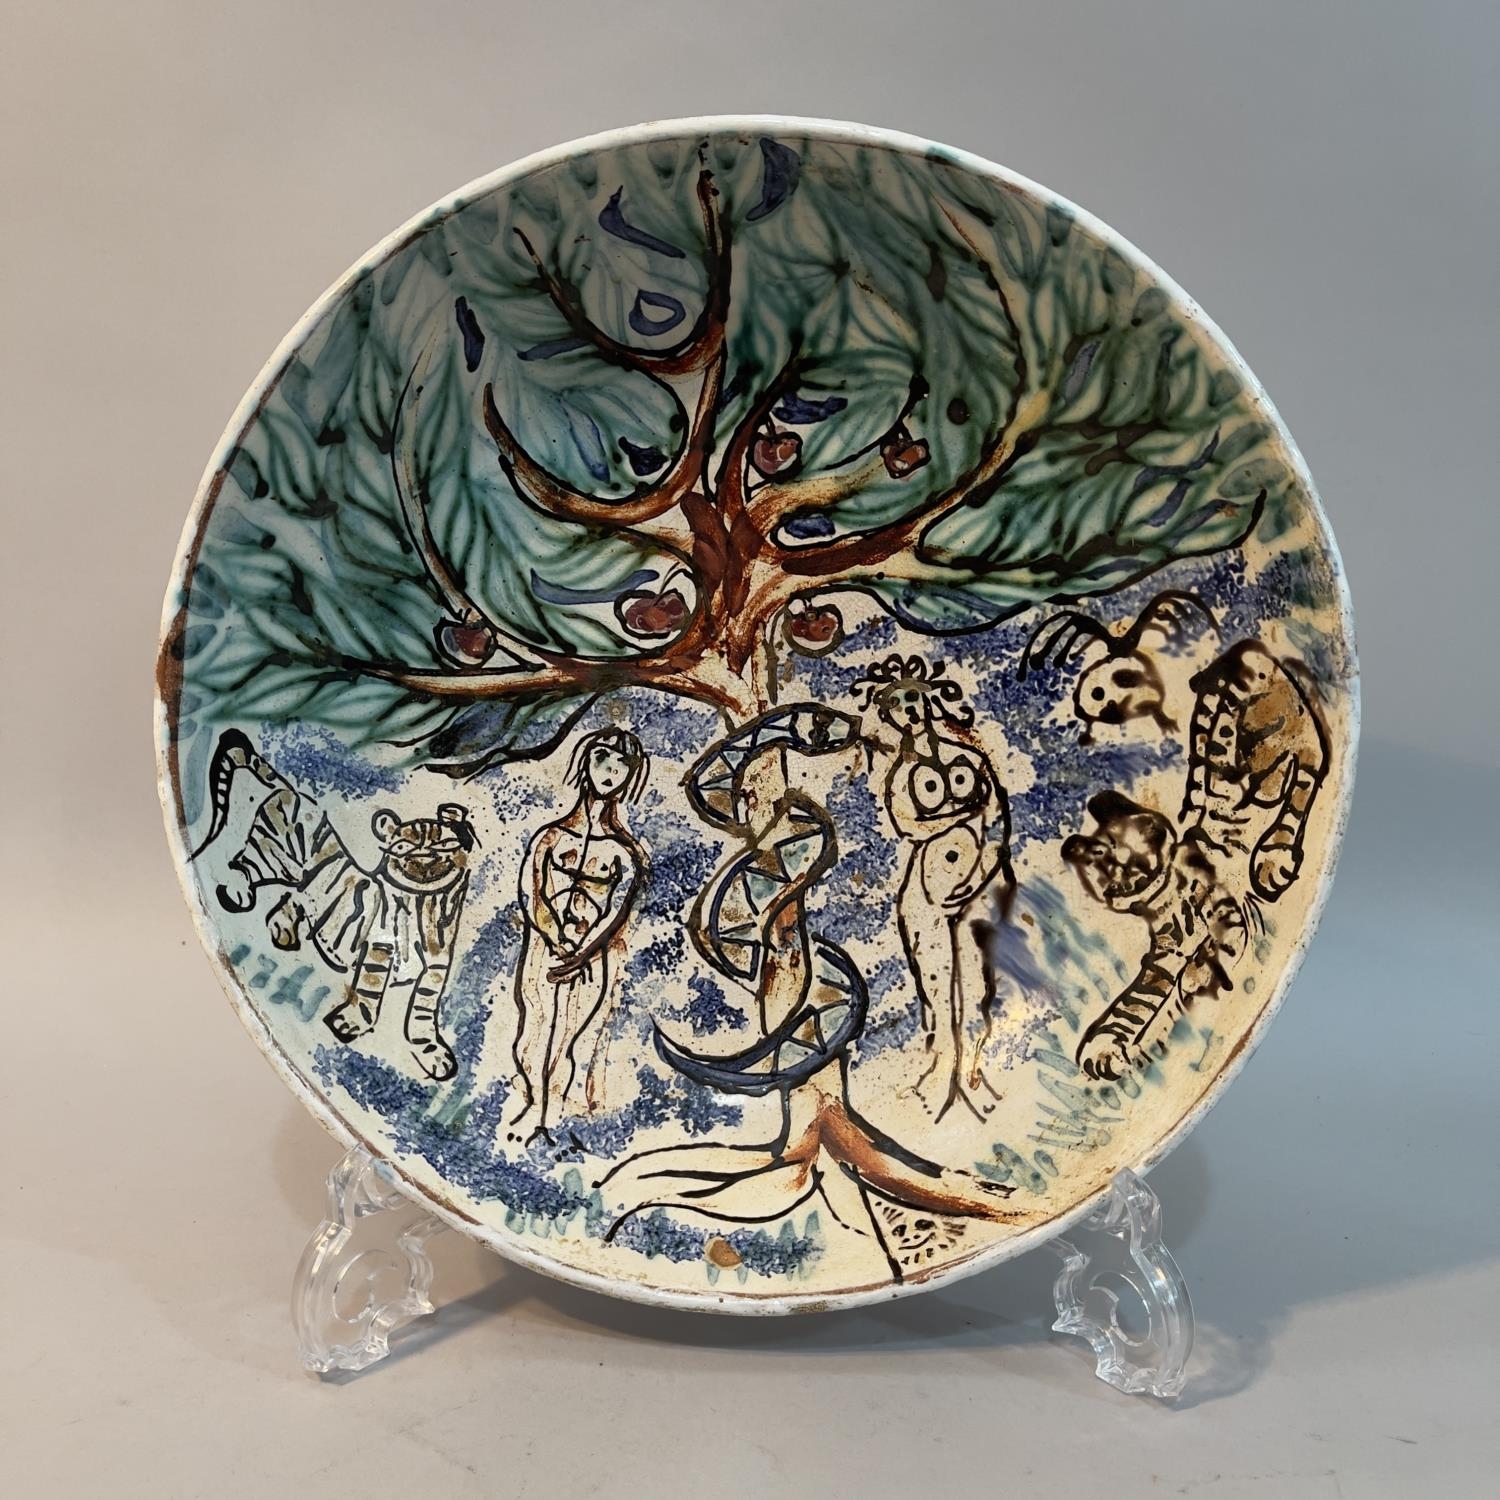 A 20th century earthenware dish painted with the Garden of Eden, with Adam and Eve, the apple tree